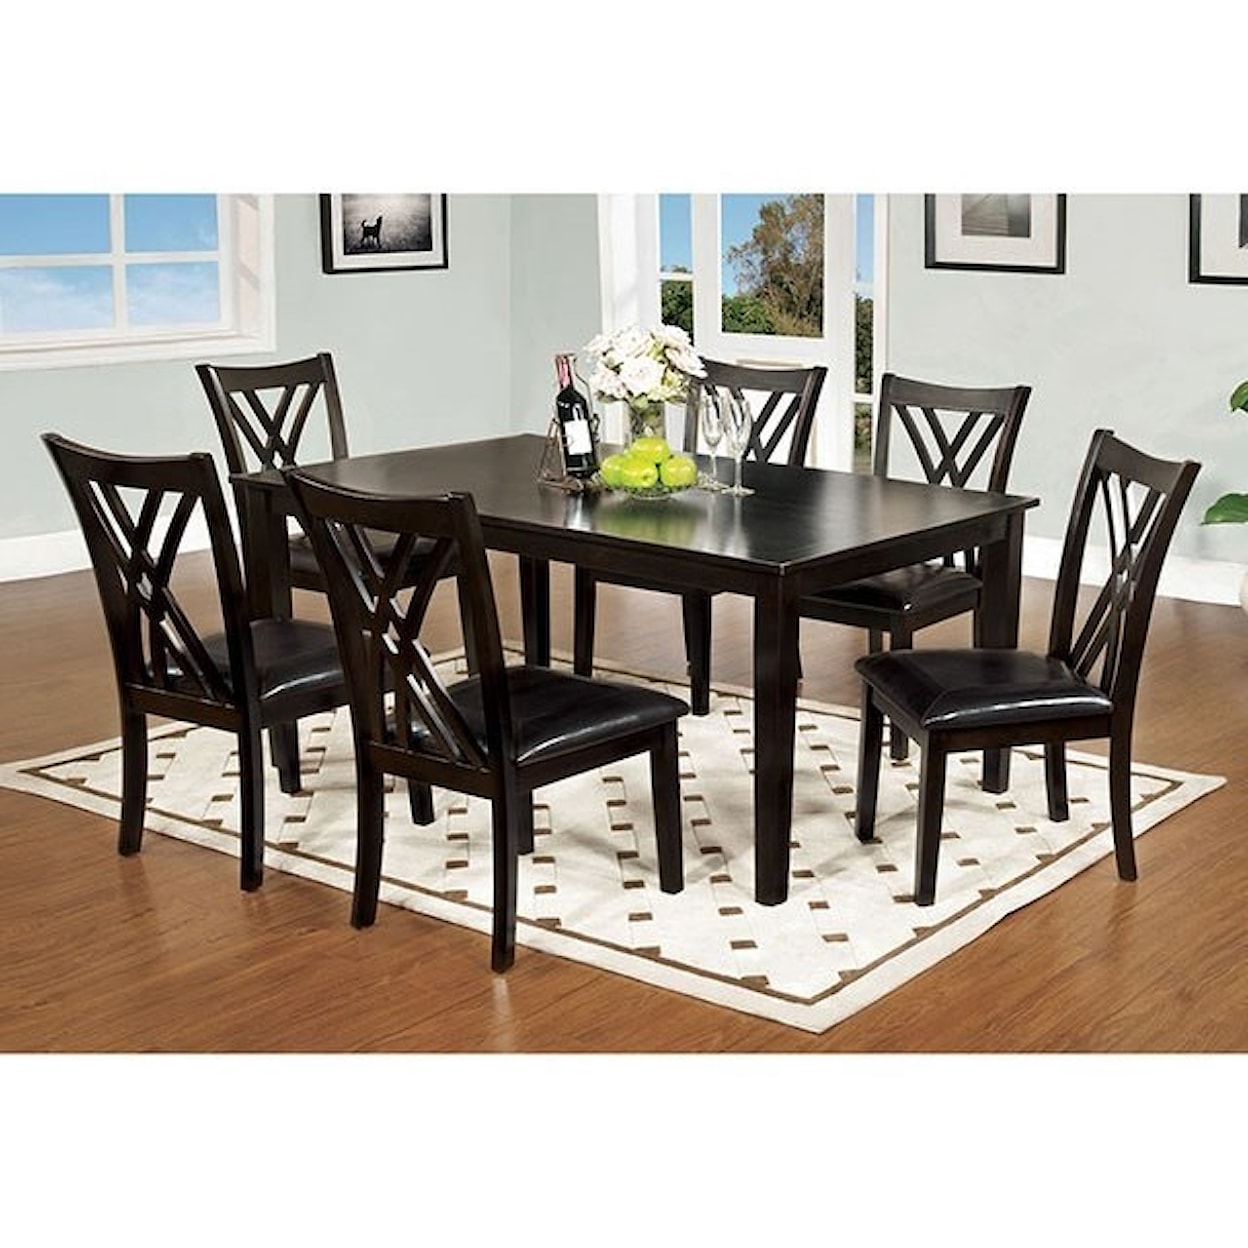 FUSA Springhill 5 Piece Dining Table Set